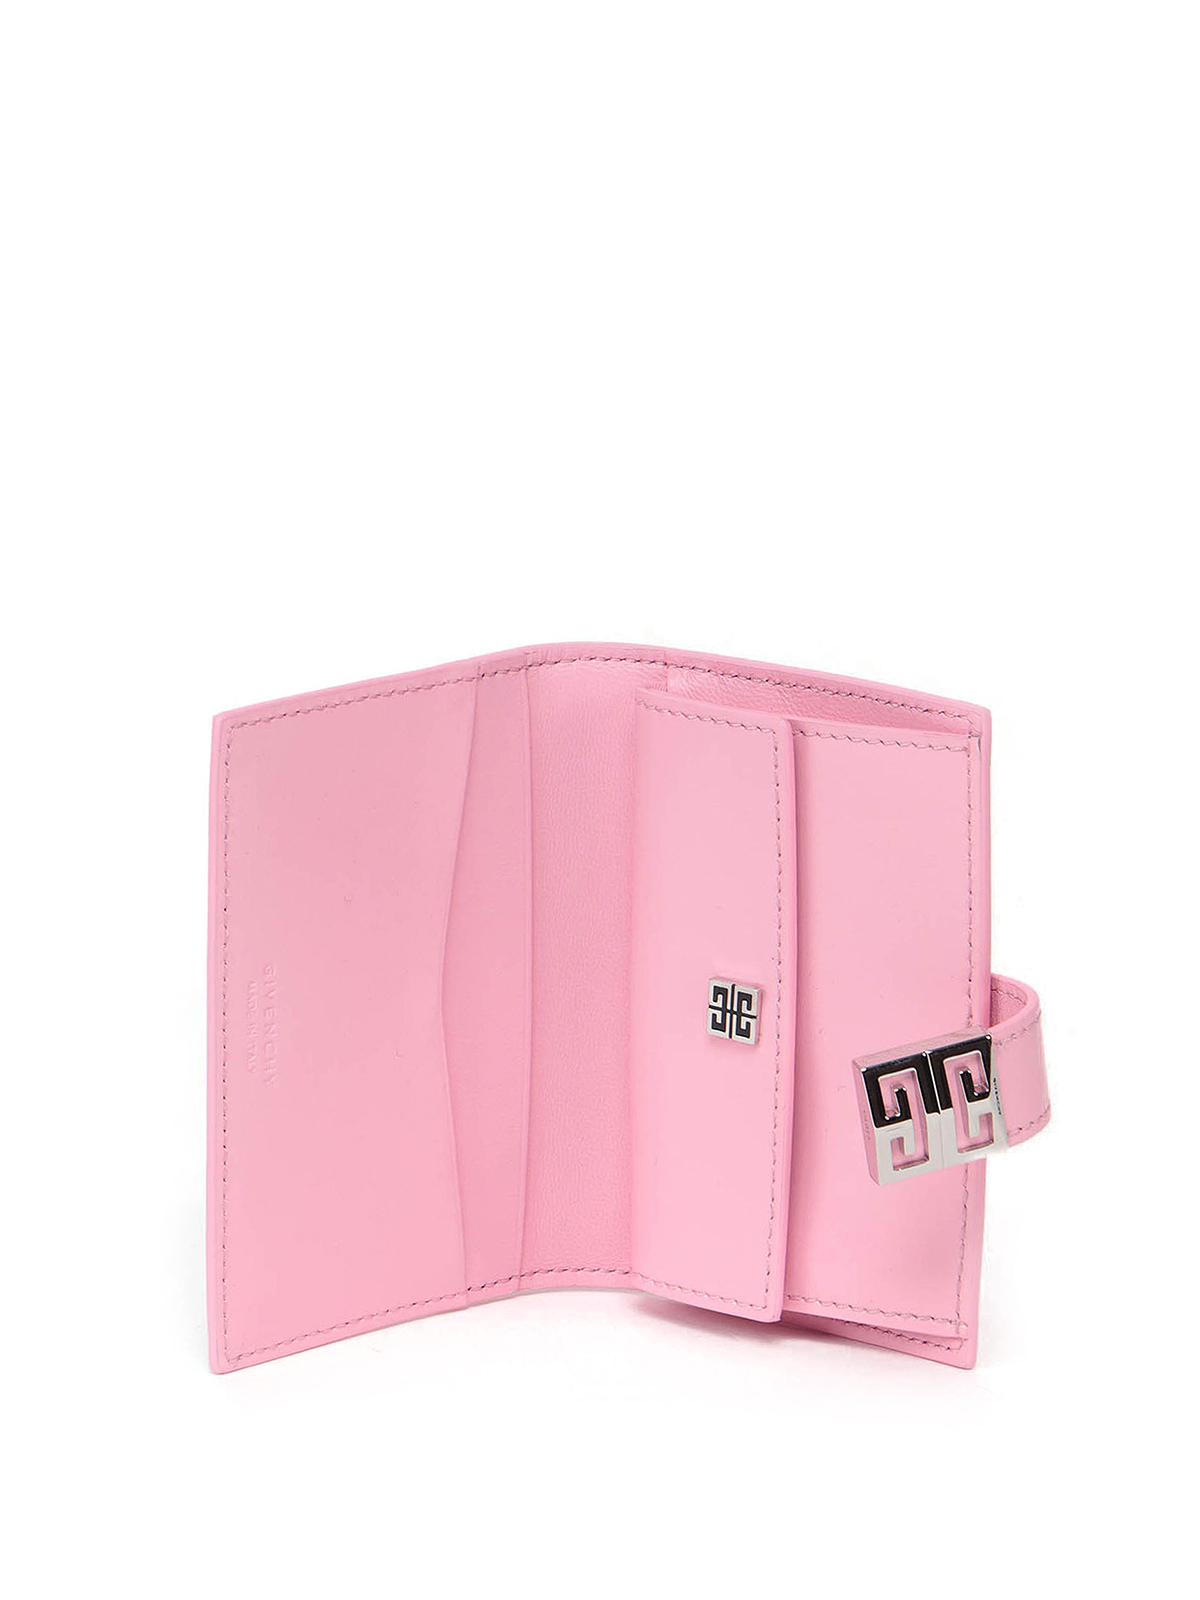 Wallets & purses Givenchy - 4G pink leather card holder 